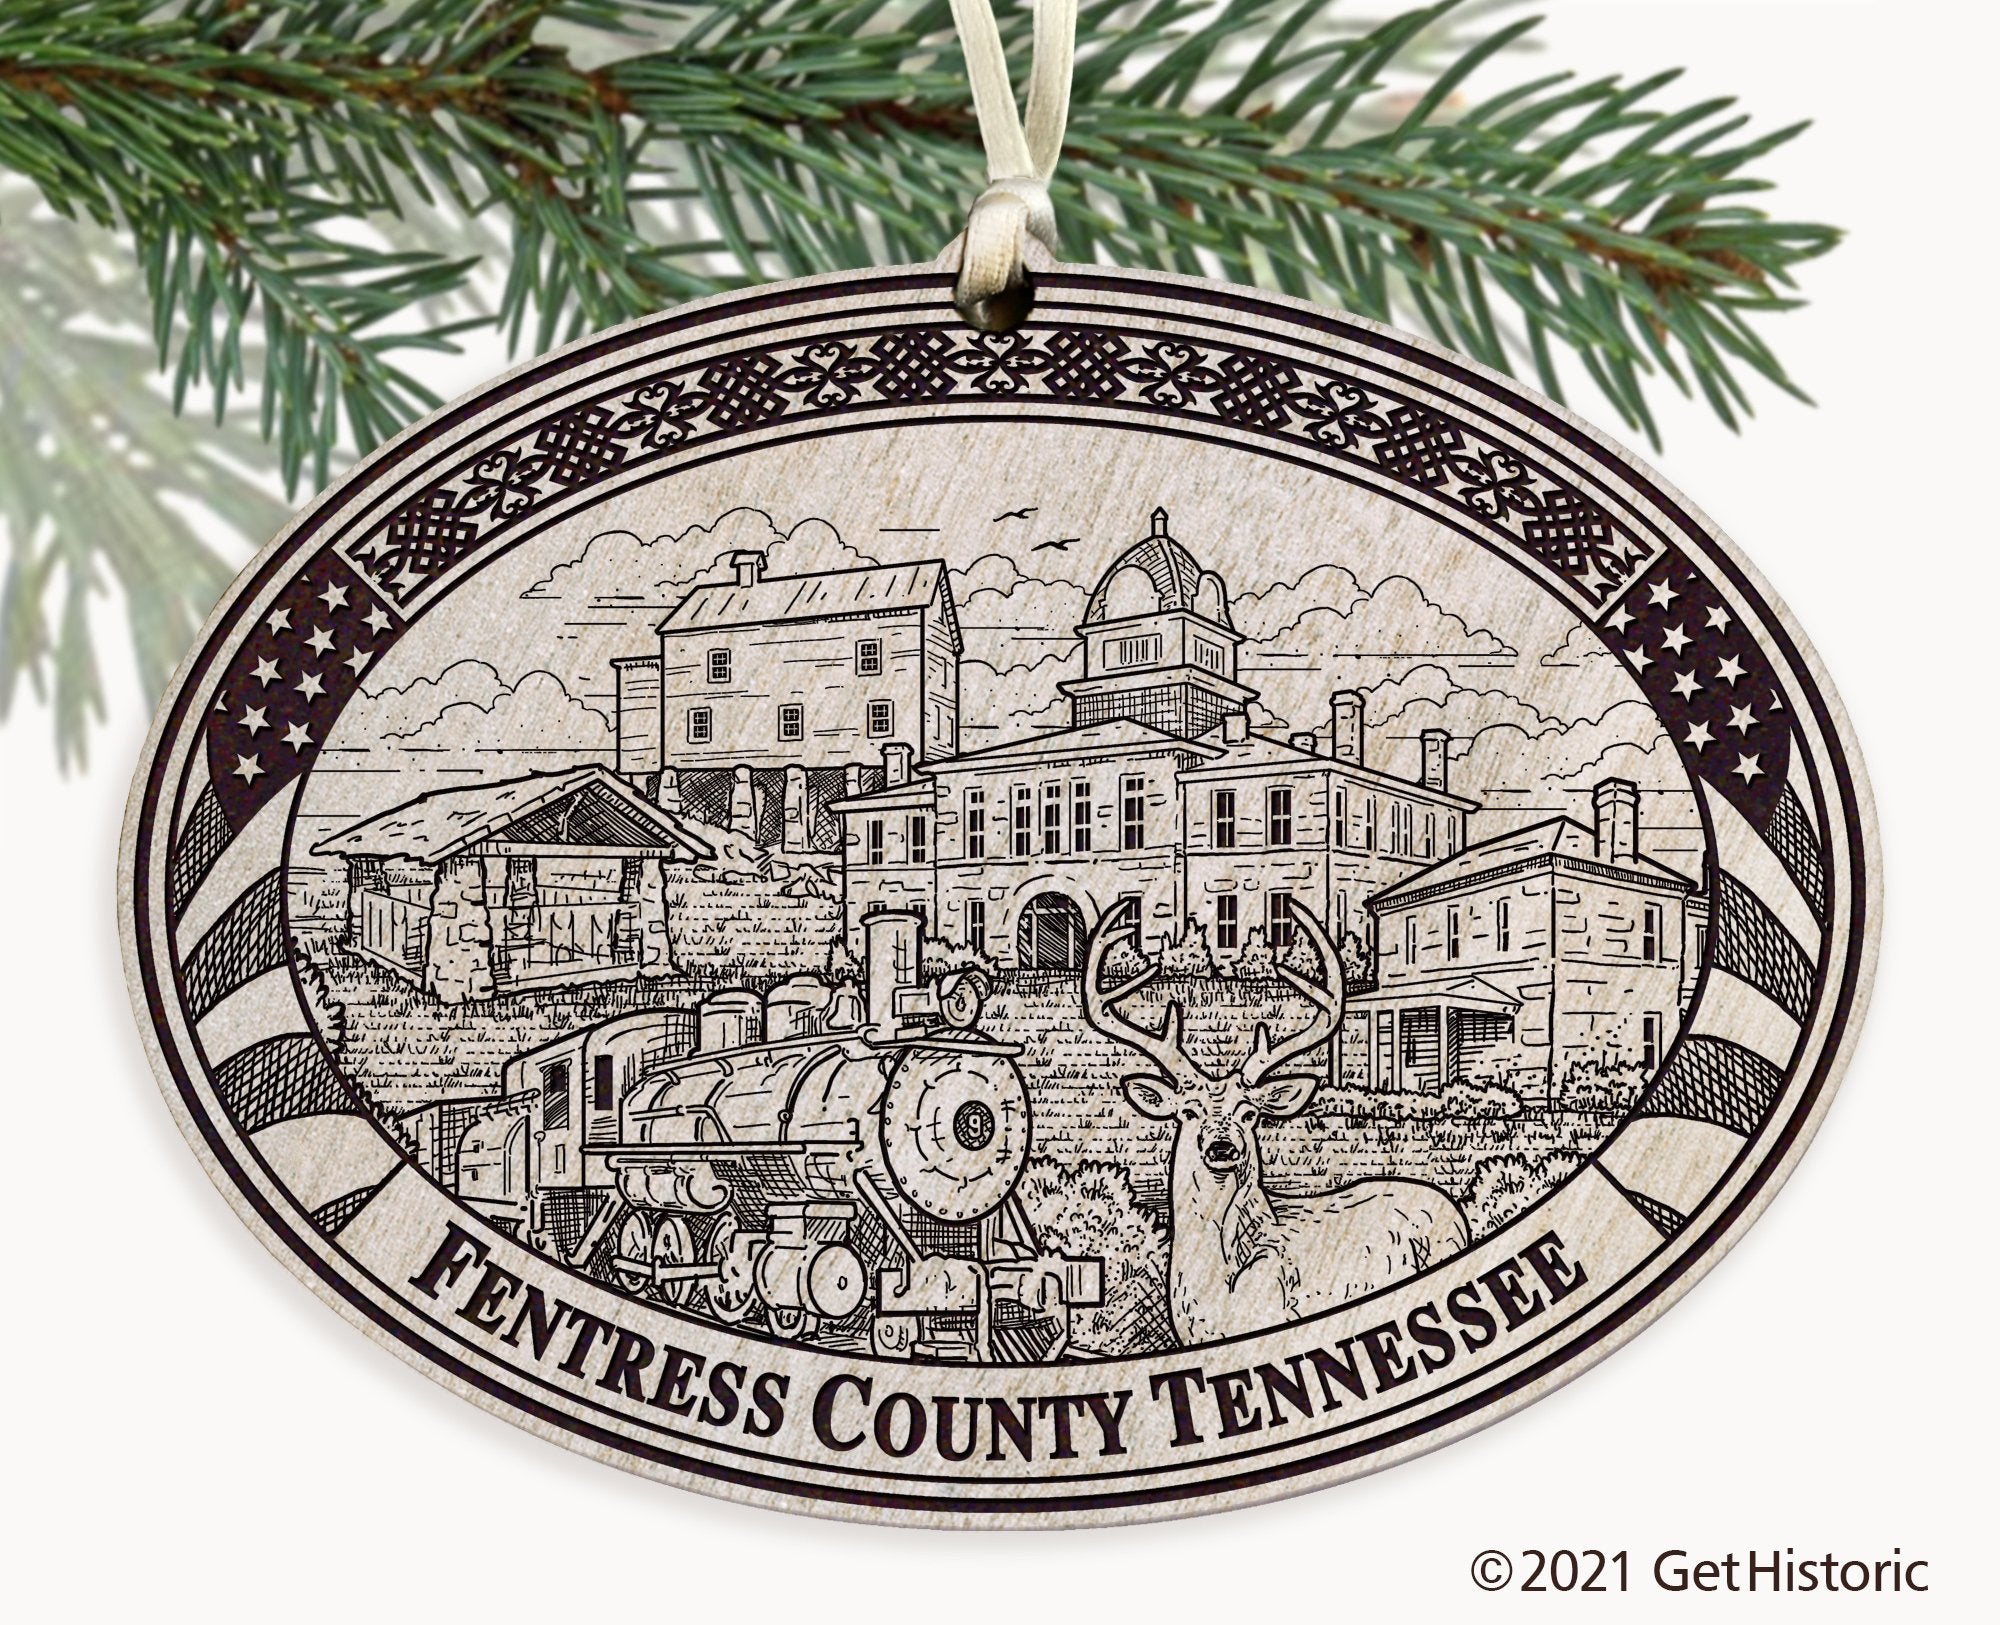 Fentress County Tennessee Engraved Ornament